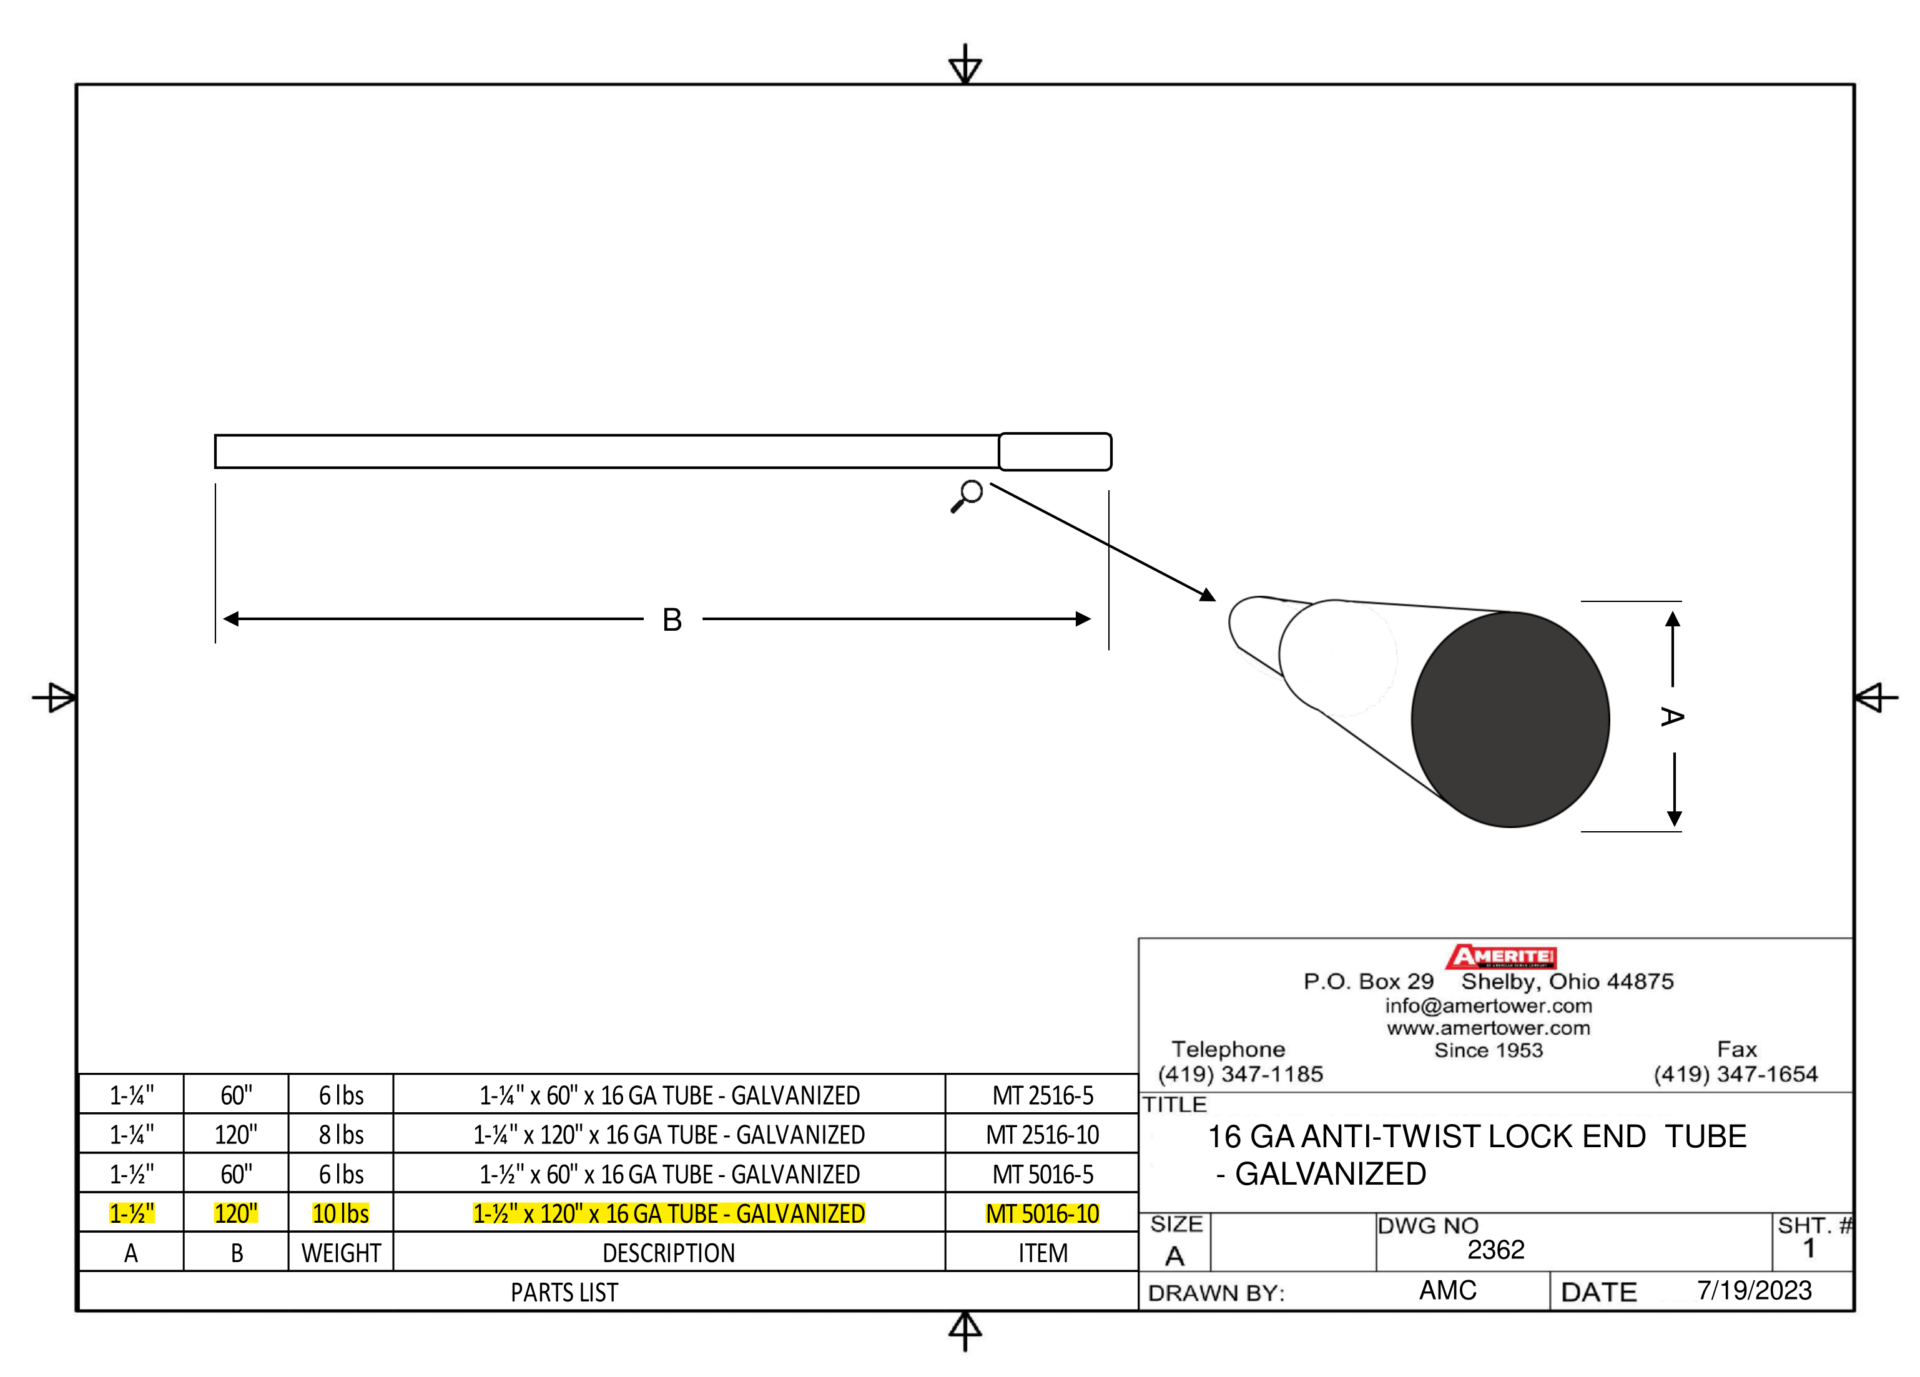 1-1/2" x 120" Expanded End Mast Tube Spec Sheet